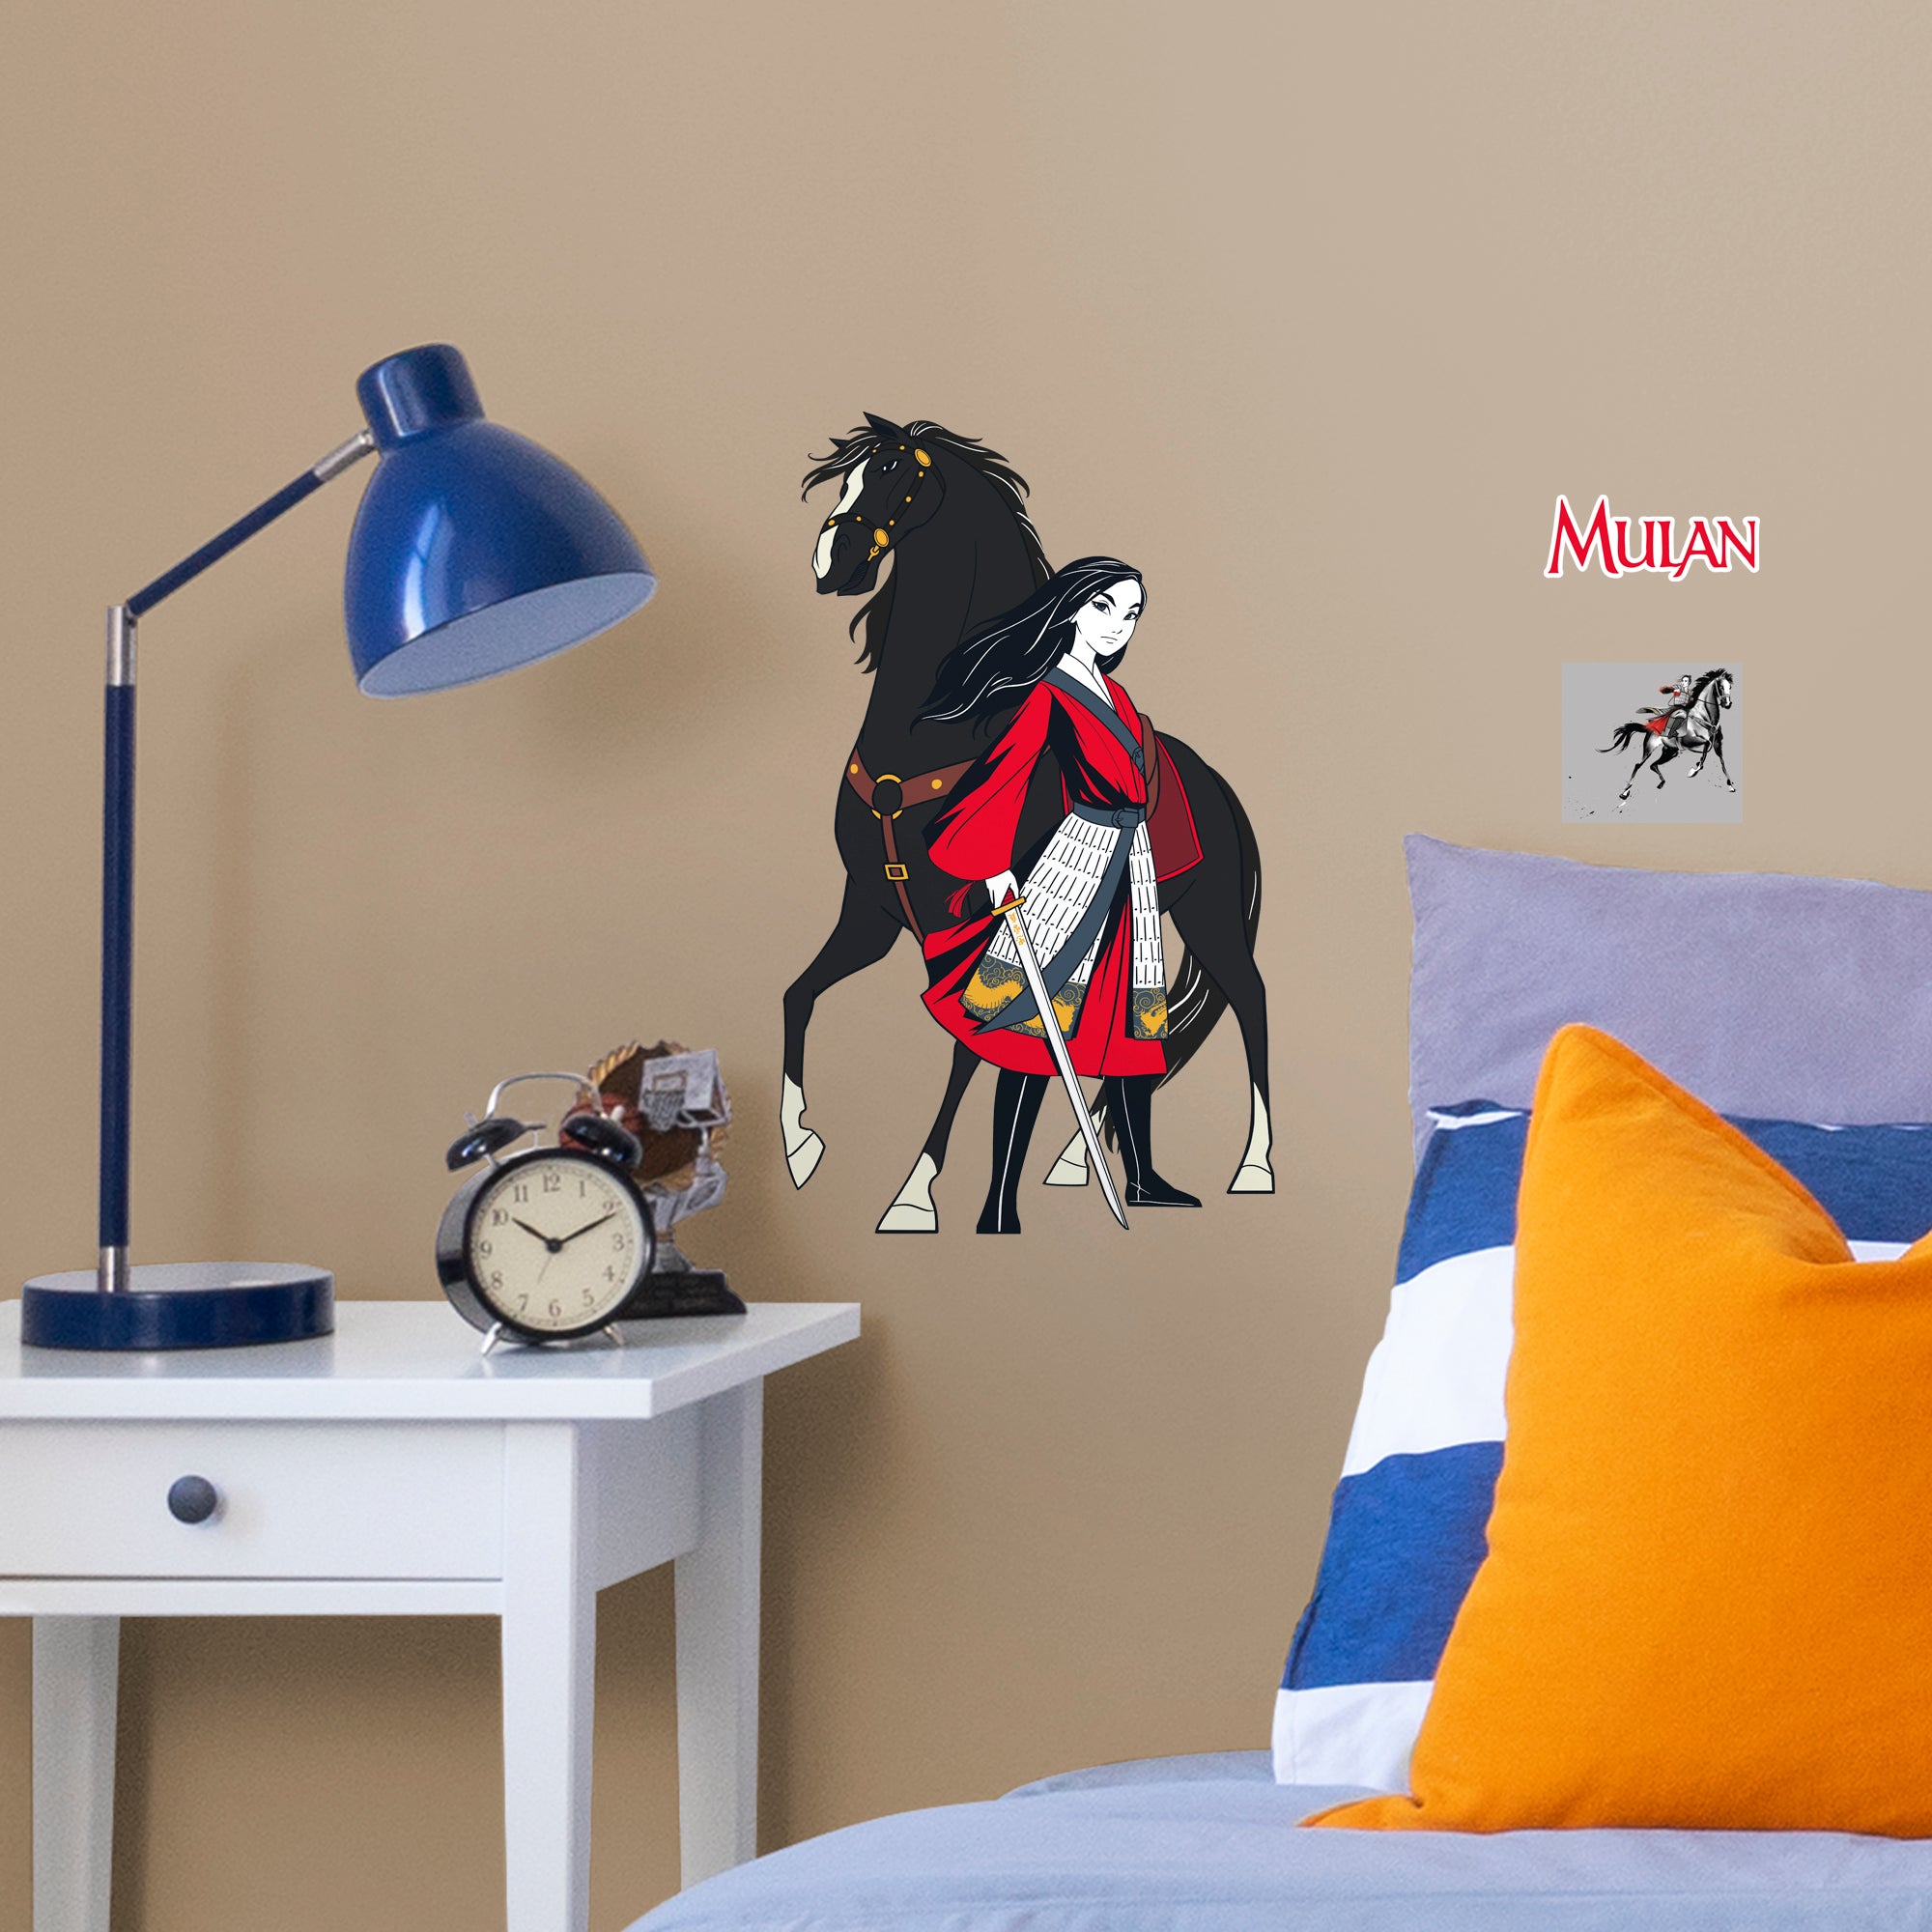 Mulan & Black Wind-Officially Licensed Disney Removable Wall Decal Large by Fathead | Vinyl